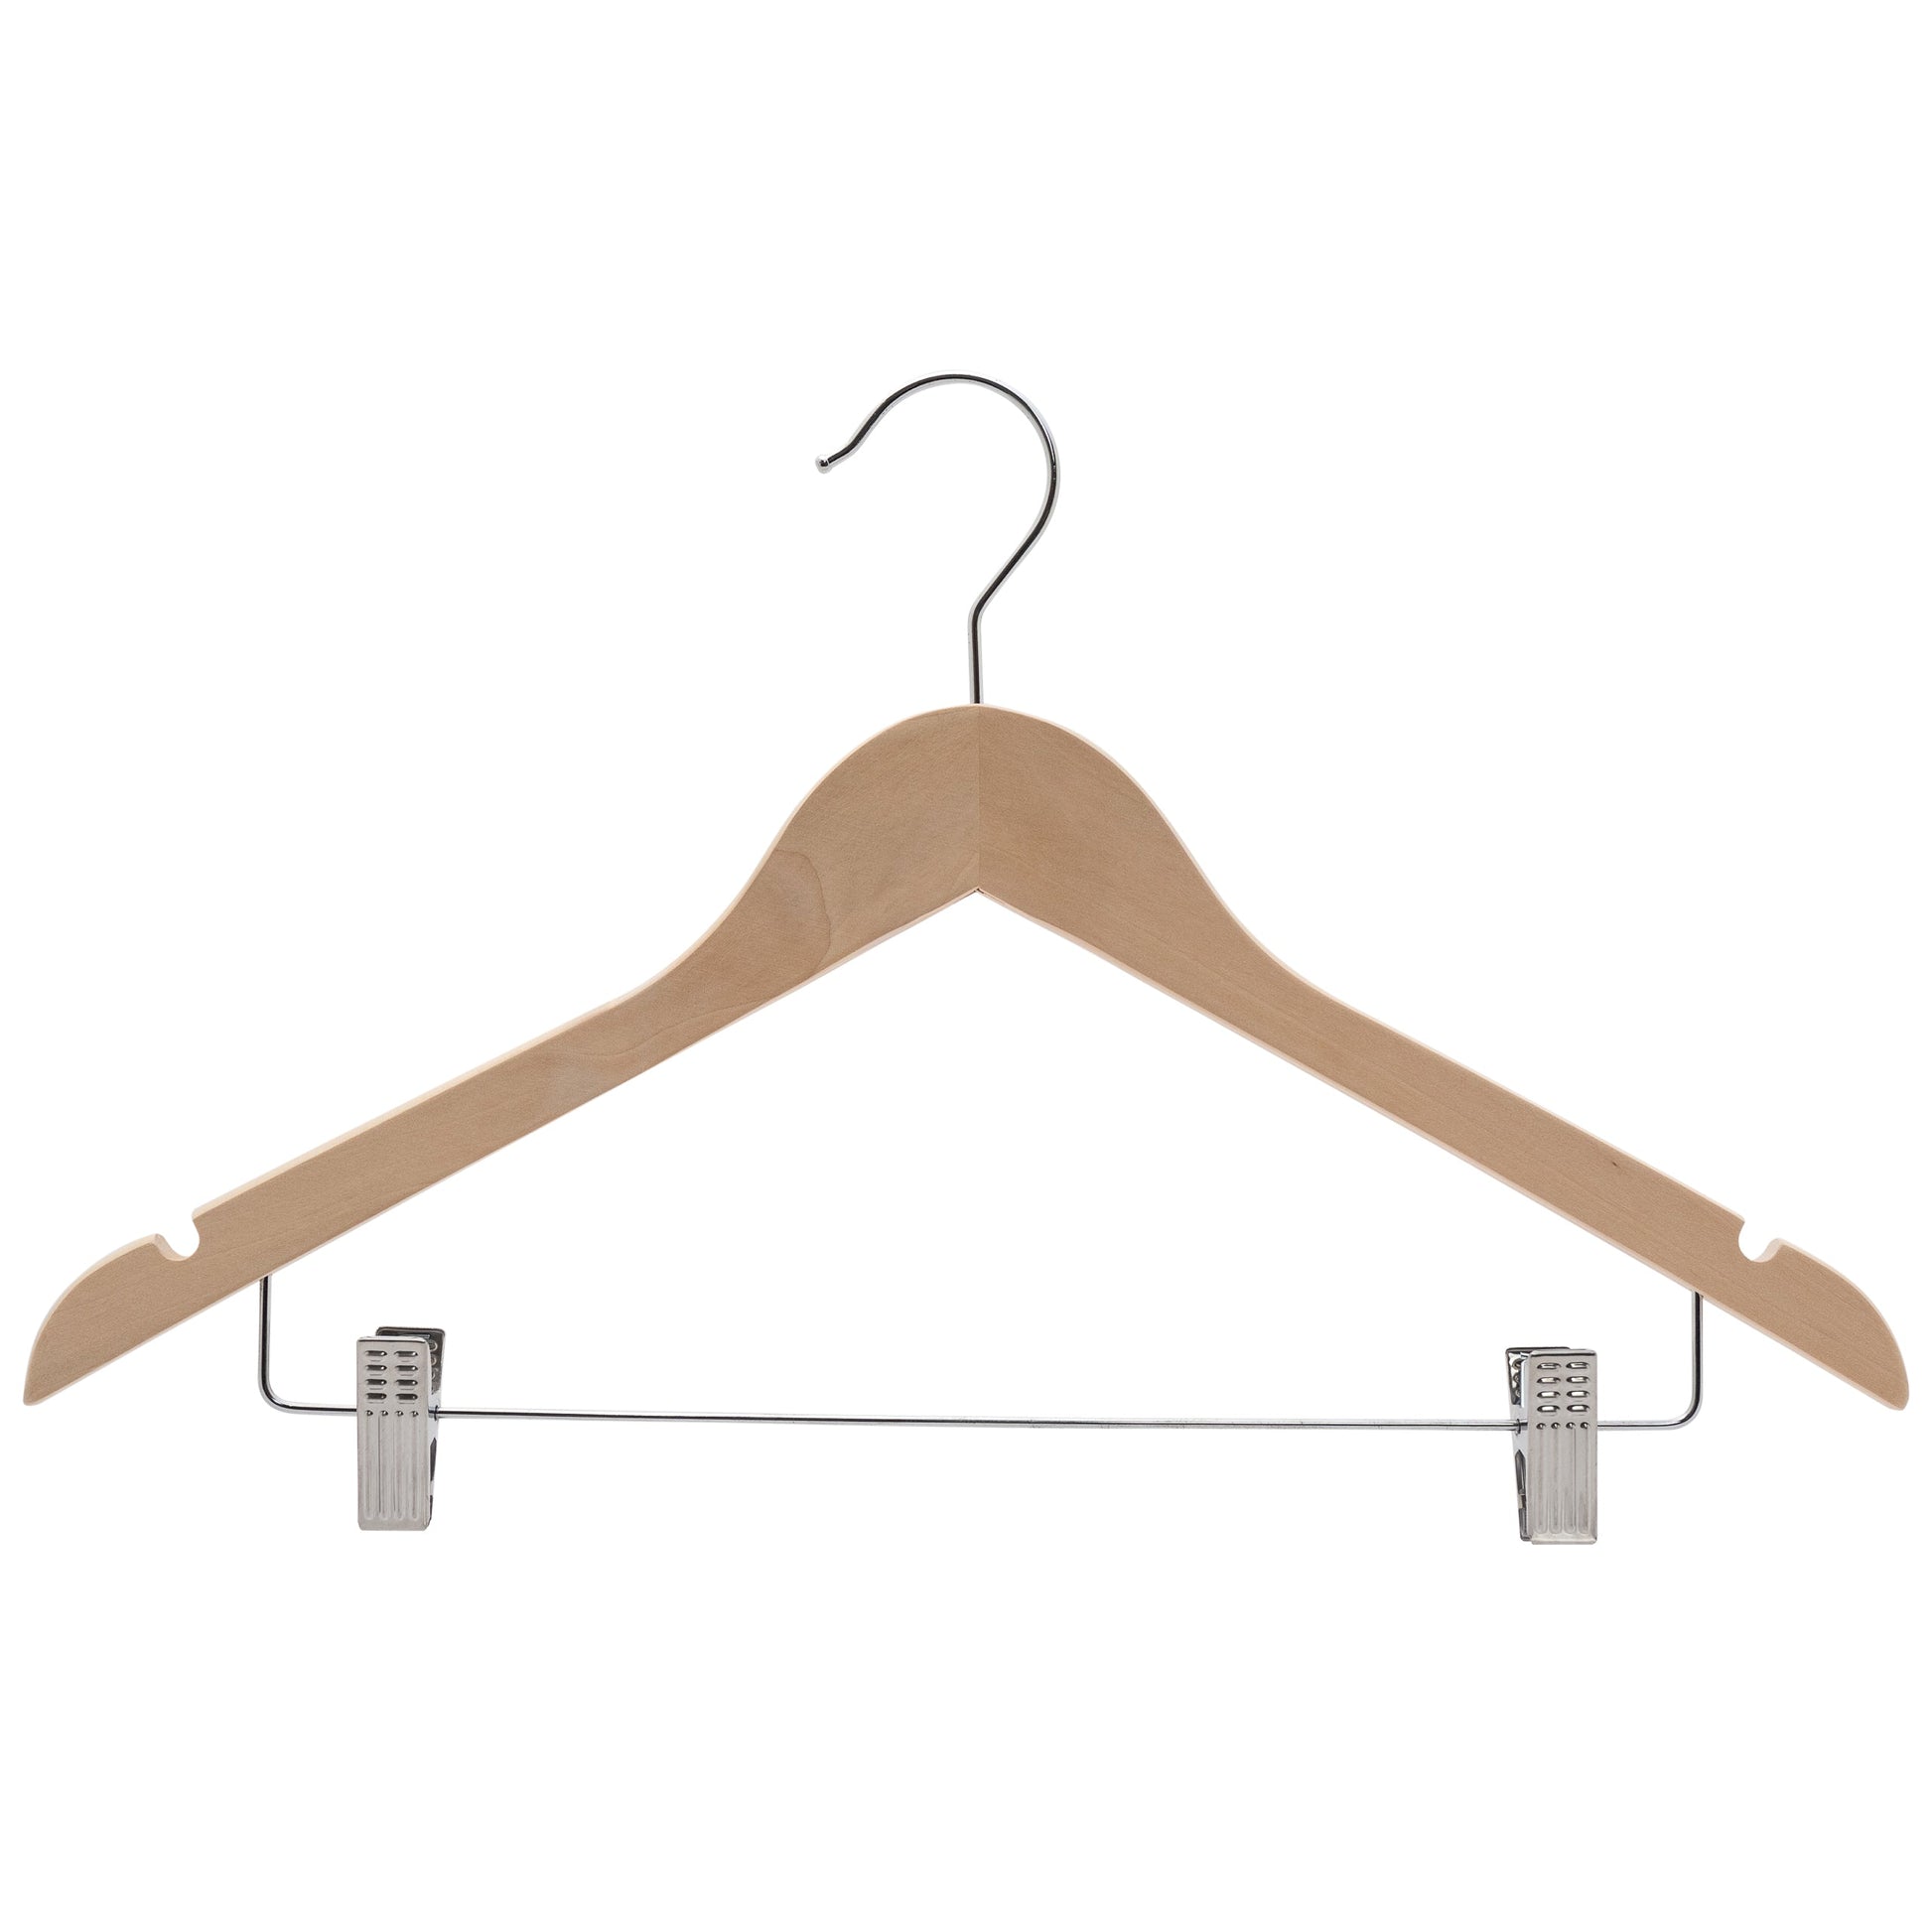 43cm Premium Raw Wood Combination Coat Hanger With Clips - NO Lacquer 12mm thick Sold in Bundle of 25/50/100 - Rackshop Australia